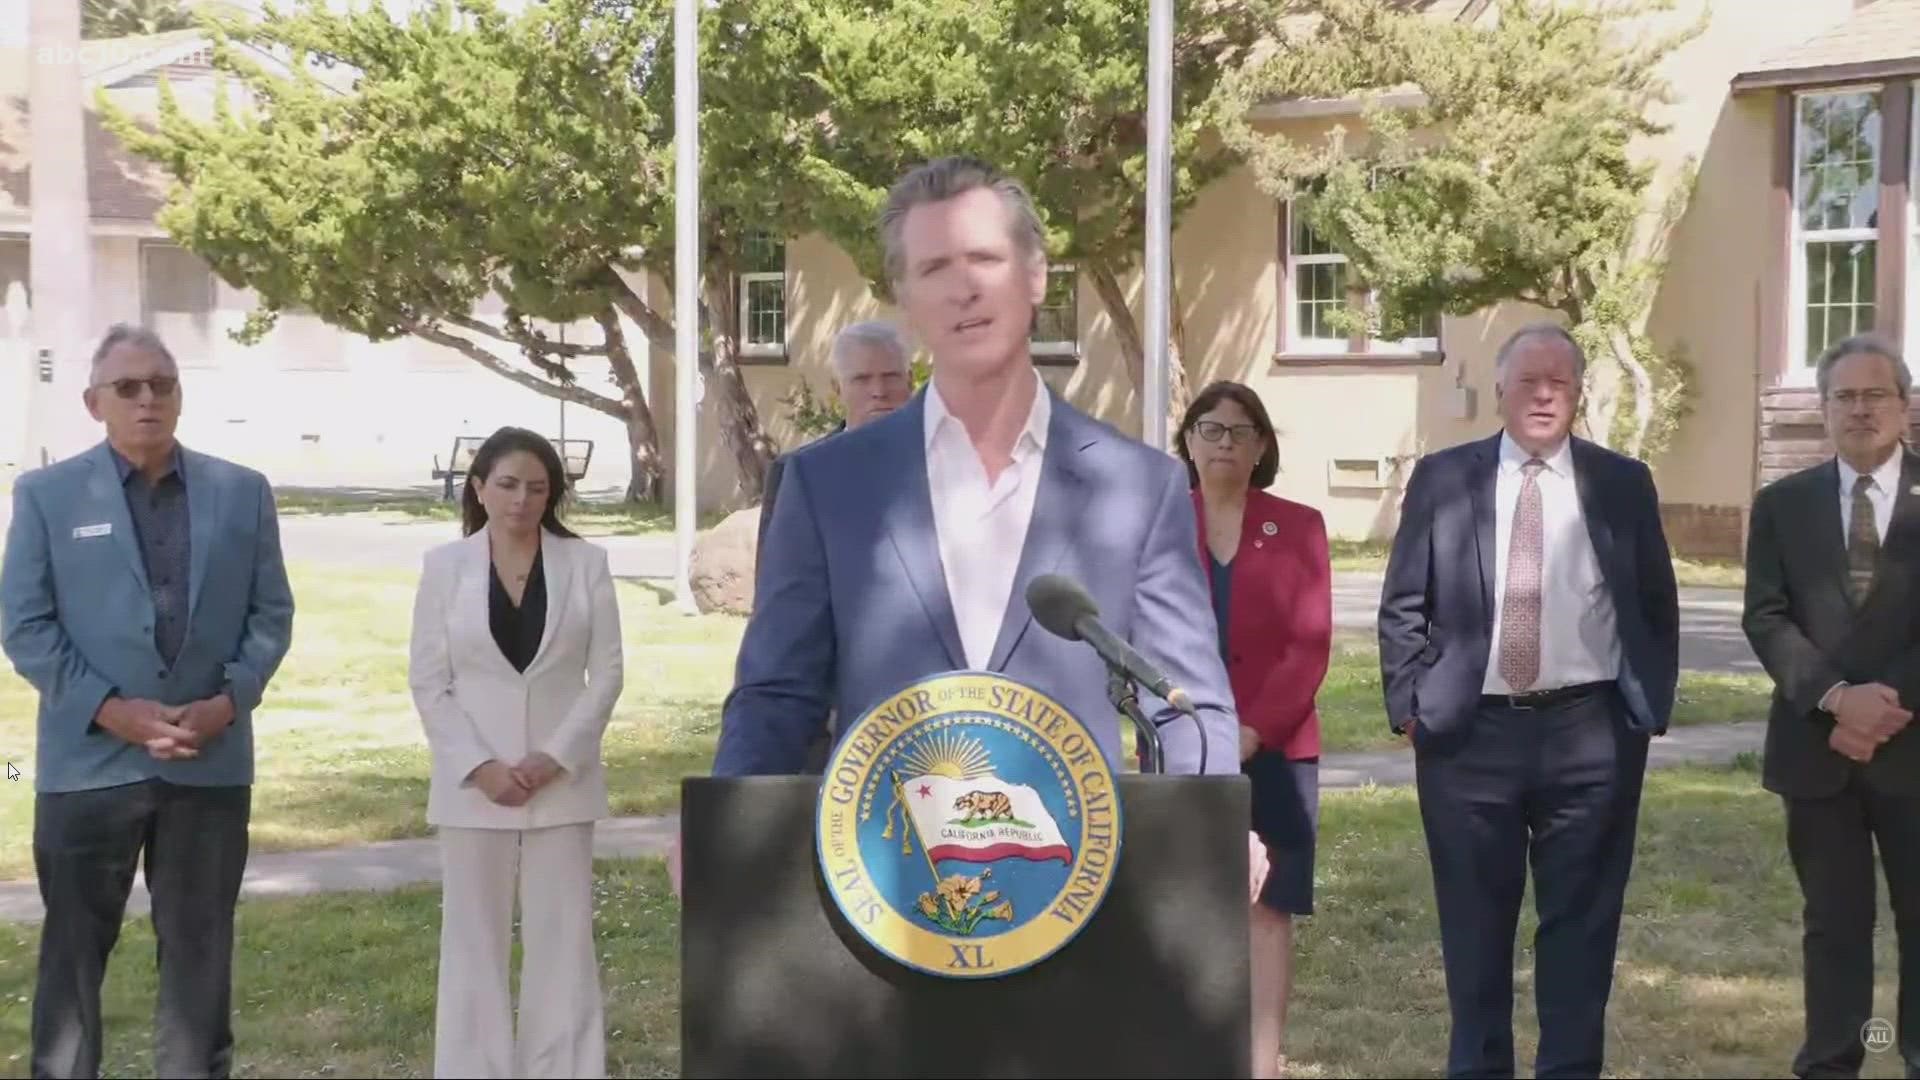 On Wednesday, Gov. Newsom proposed $9 billion in tax refunds to address rising gas prices.